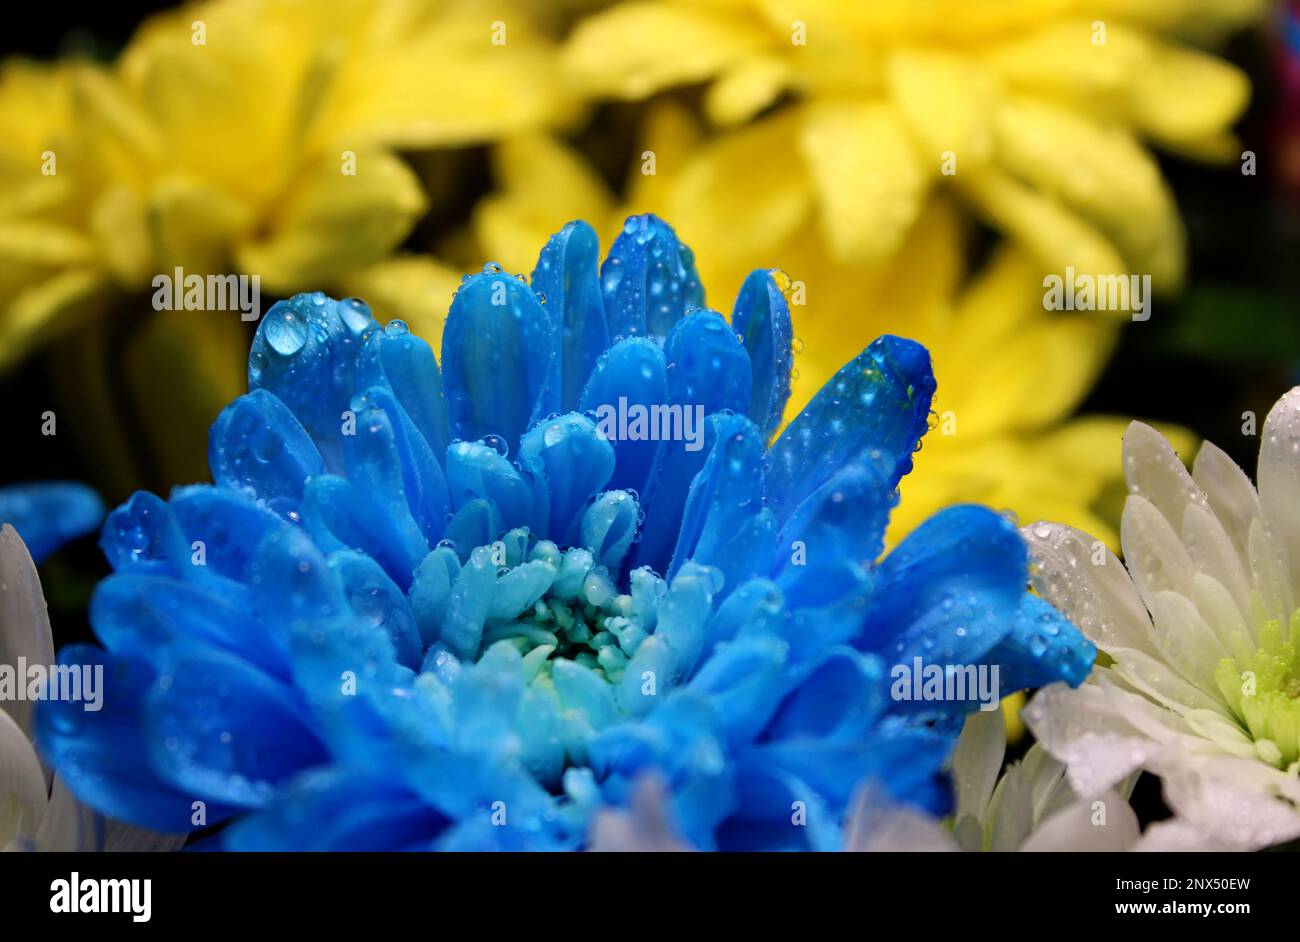 Detailed photo of drops on yellow and blue flowers in the colors of the Ukrainian flag Stock Photo